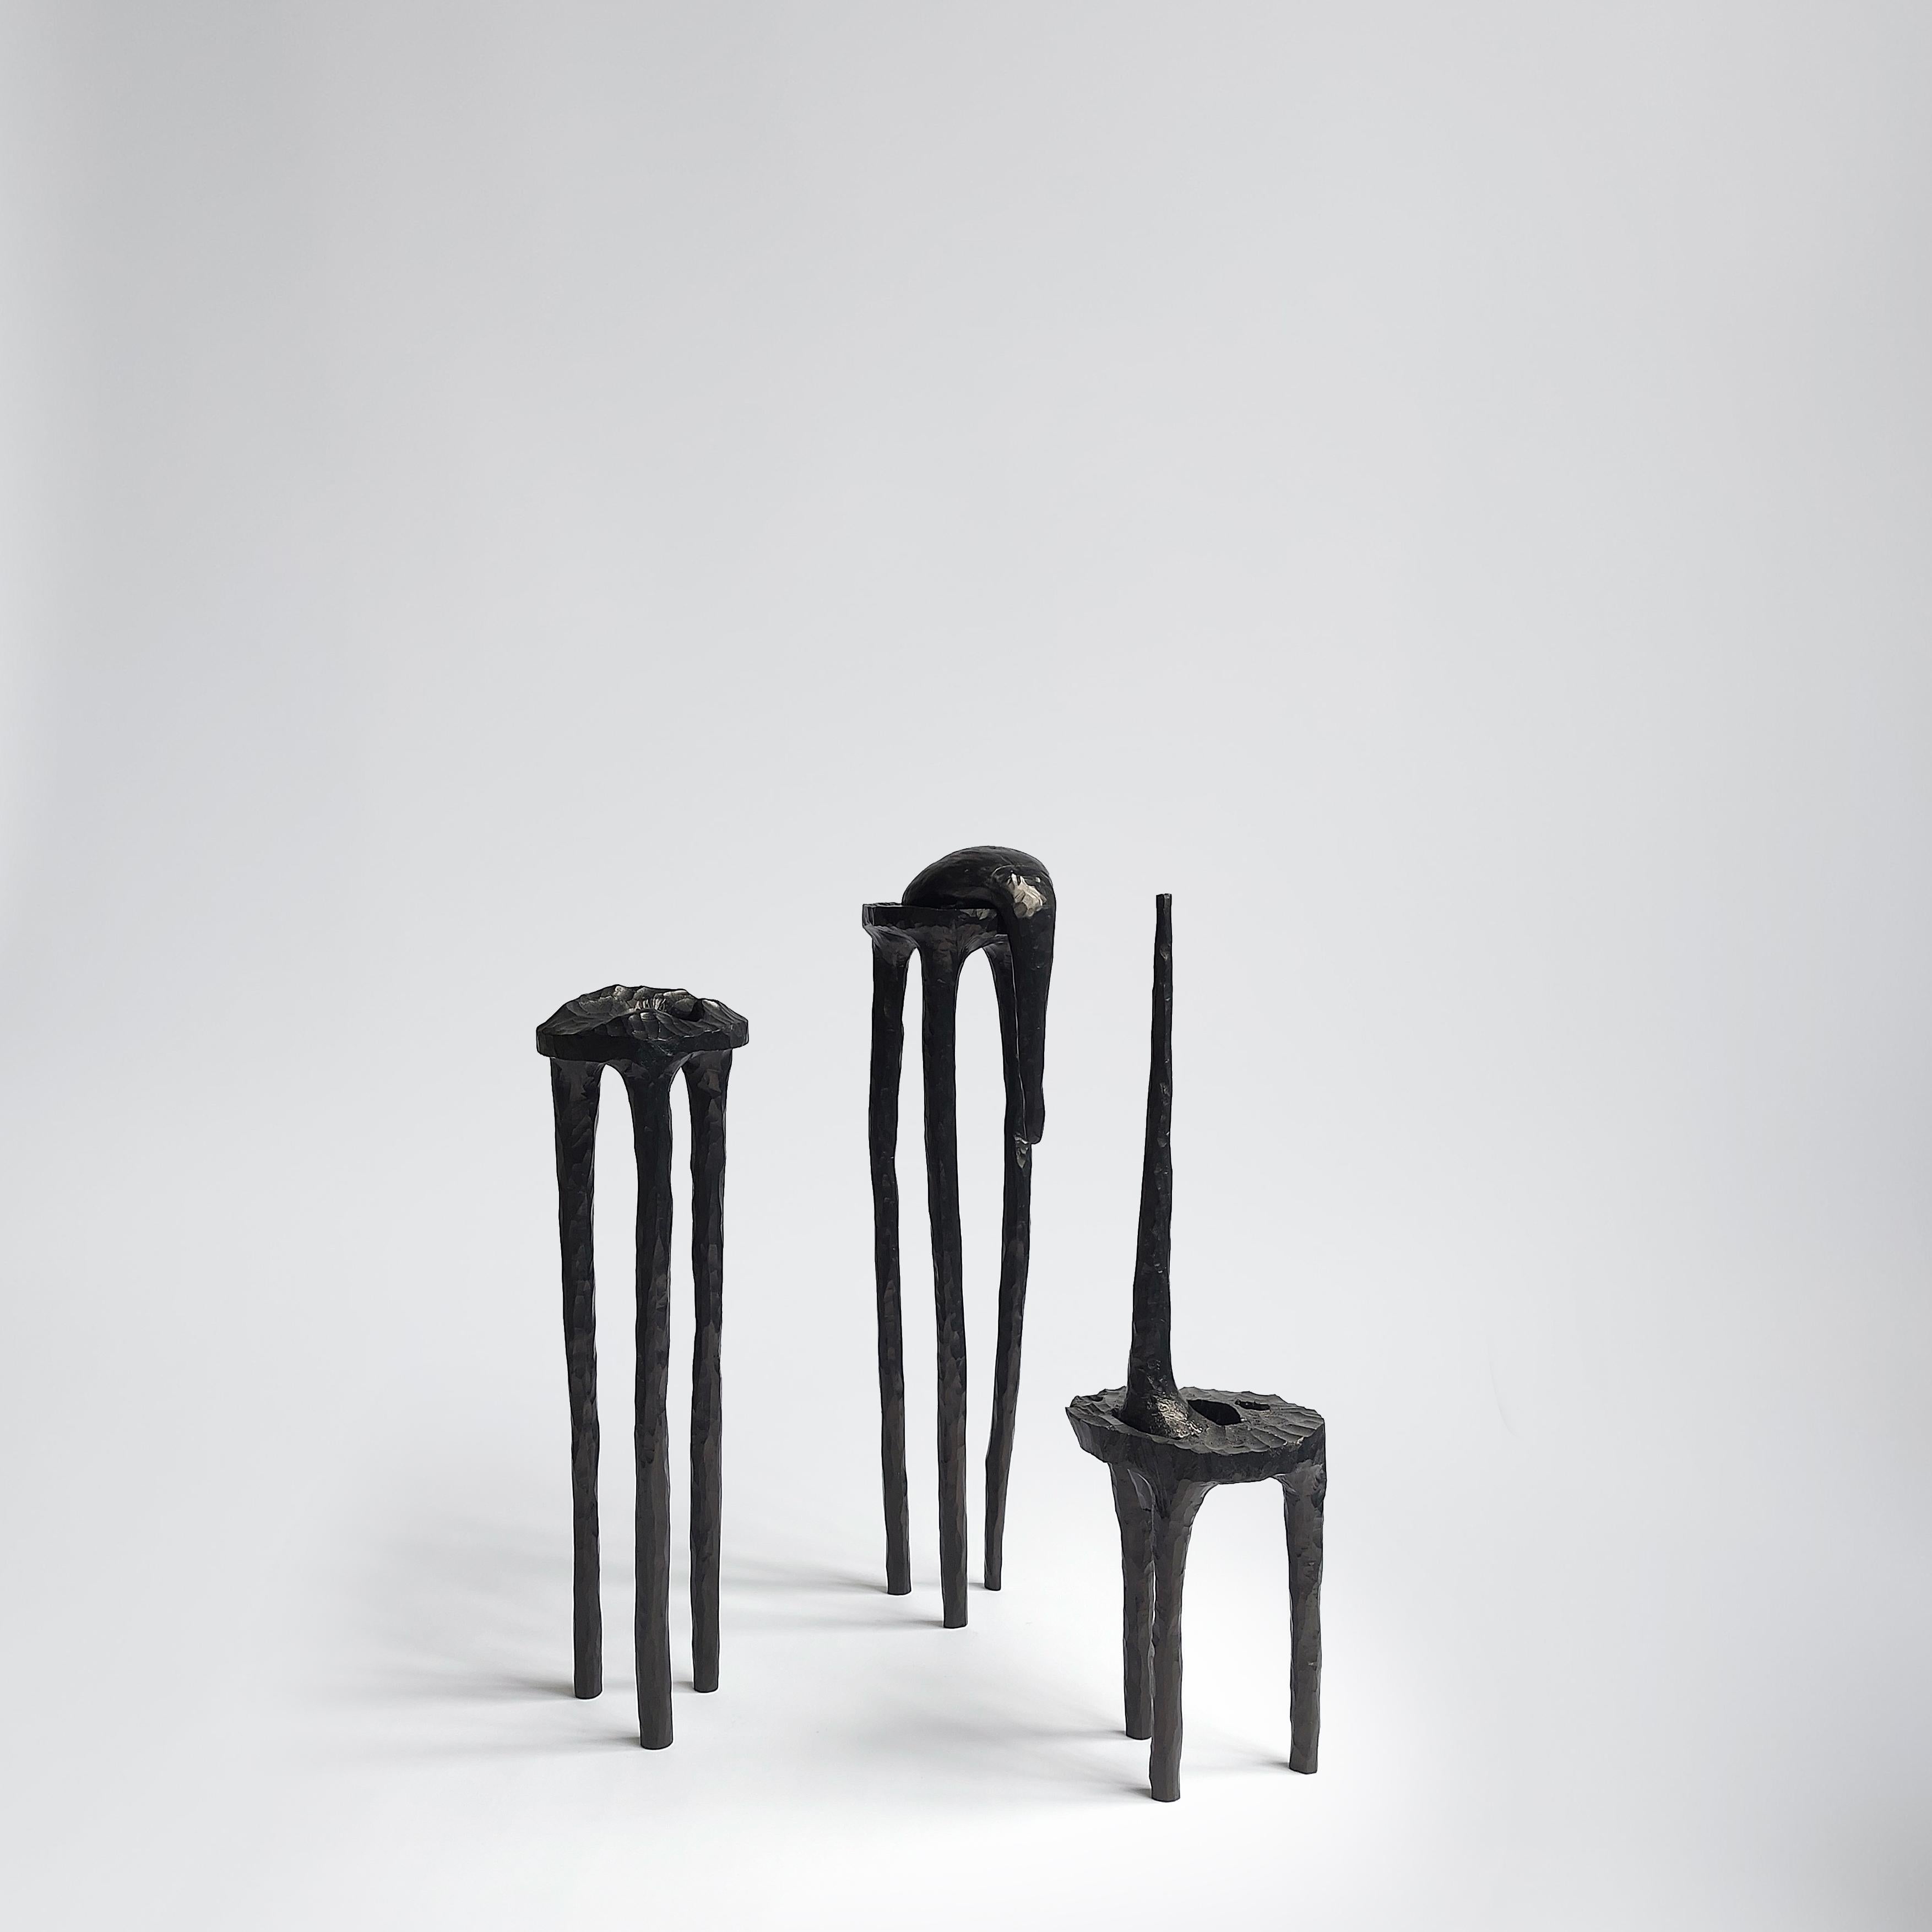 Set of 3 Handemade Objects by Henry D'ath
Dimensions:D15 x H60 cm each
Materials:Wood, Calligraphy Ink

Piece is handmade by artist.

Henry d’ath is a new zealand born, hong kong based artist and architect. 
Using predominantly salvaged